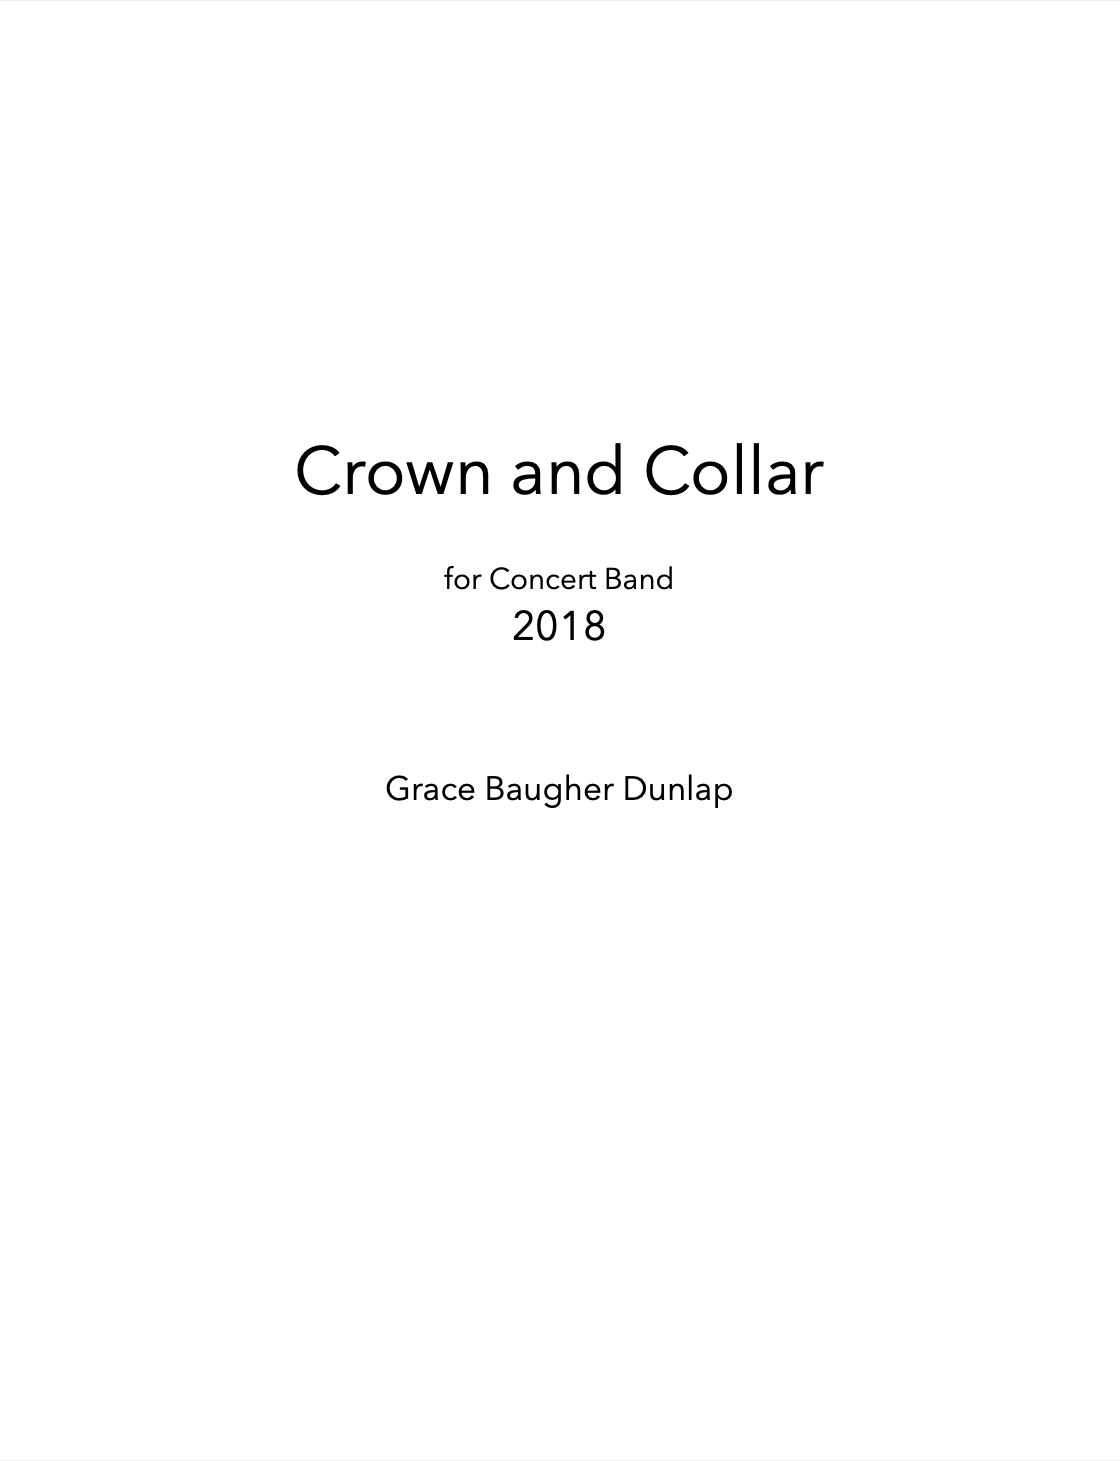 Crown And Collar by Grace Baugher